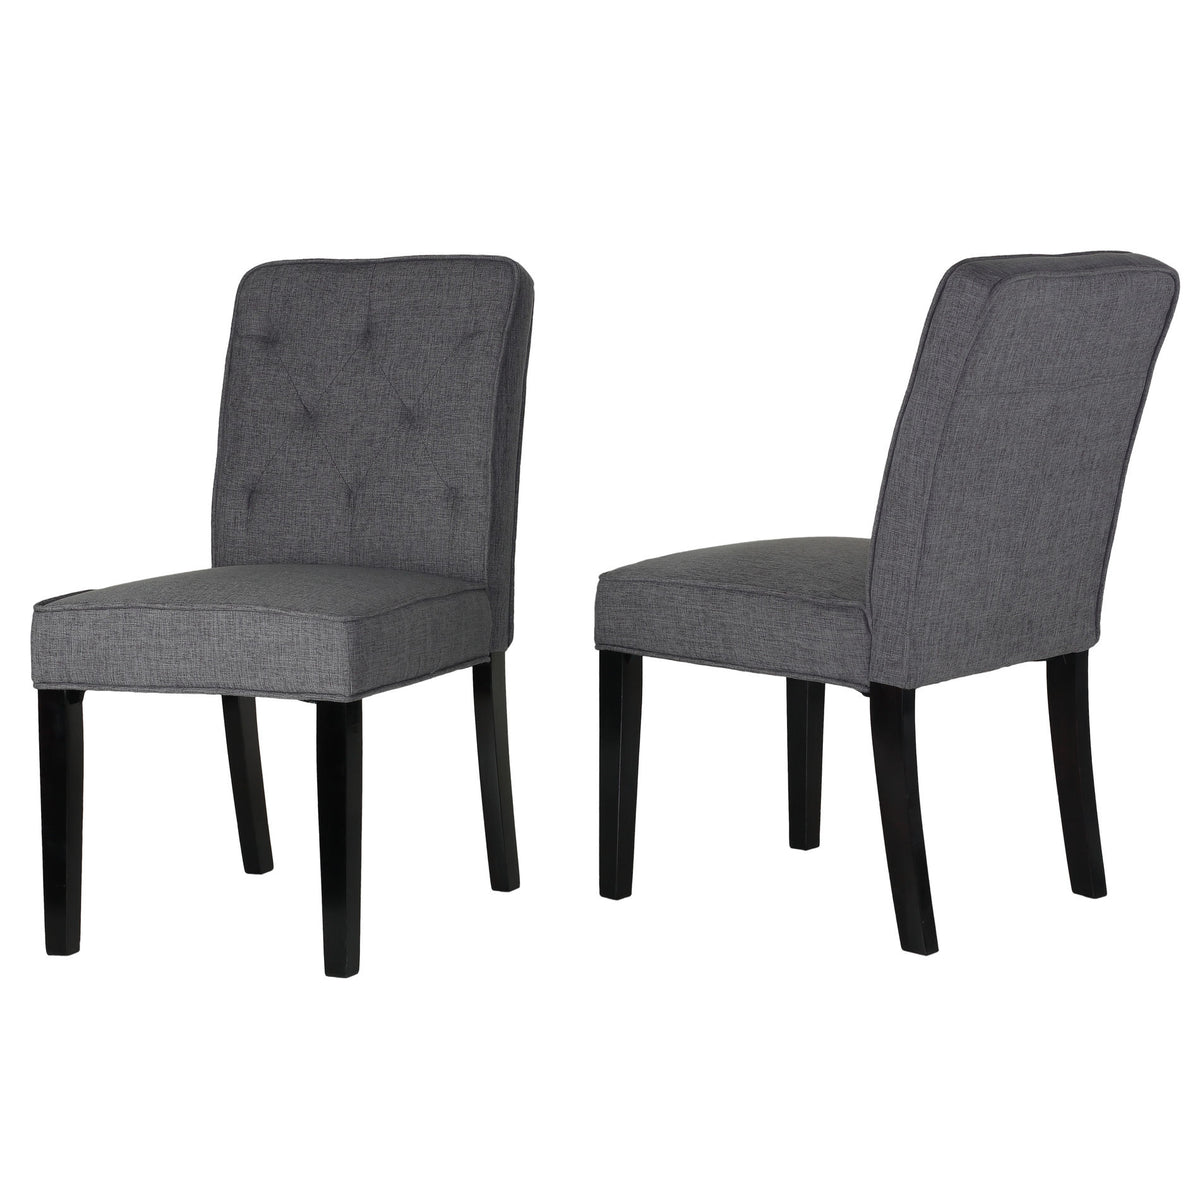 Cortesi Home Lyndon Dining Chair in Grey Linen Fabric with Tufted Back (Set of 2)